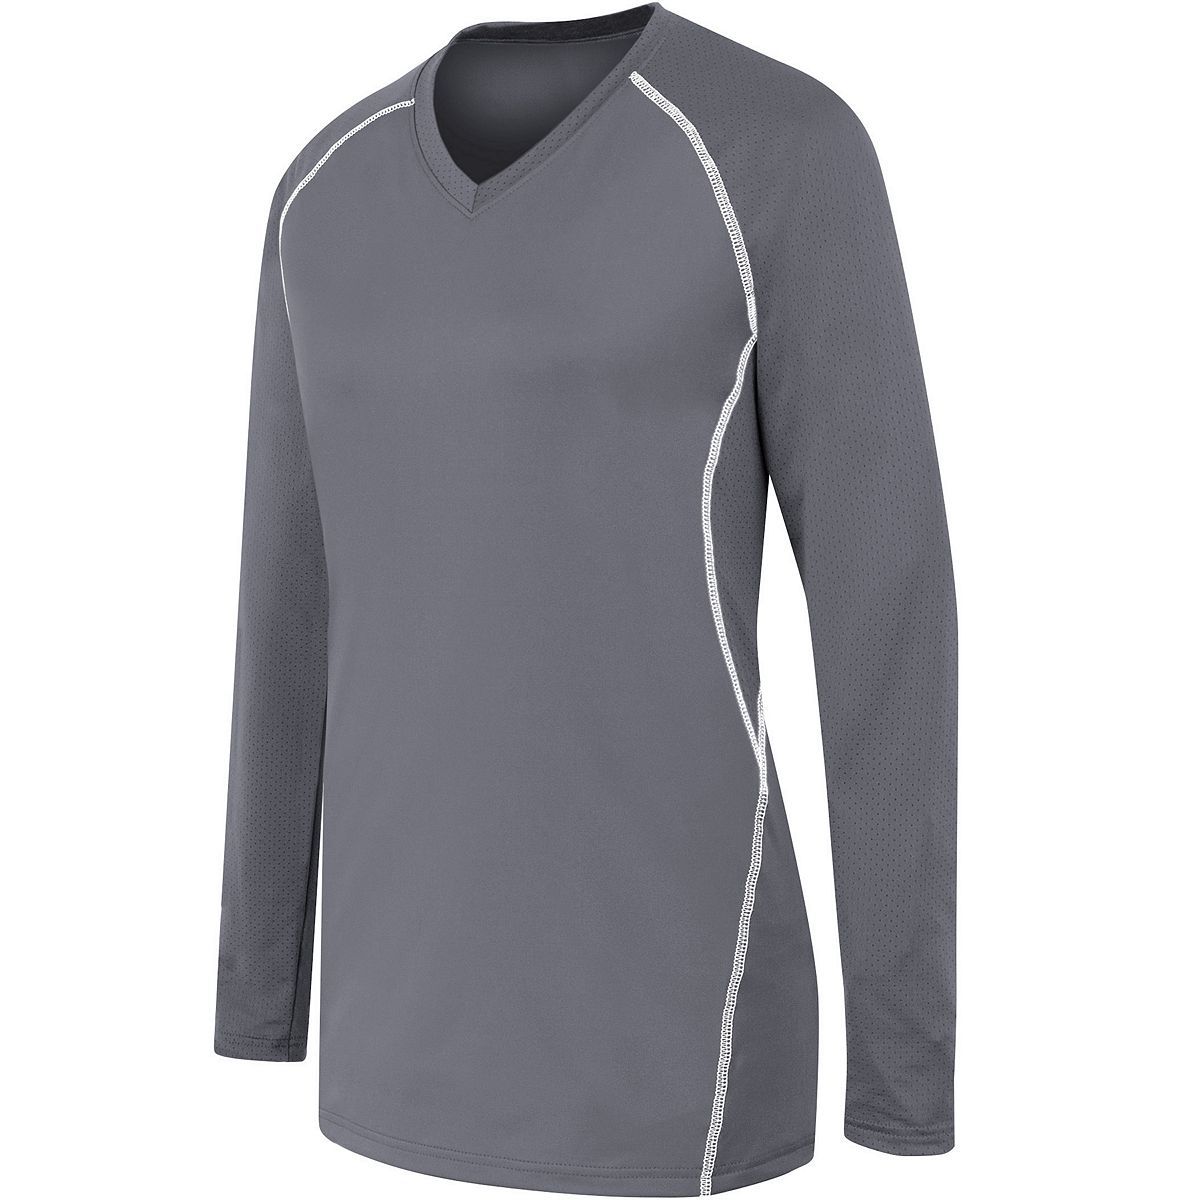 High 5 Ladies Long Sleeve Solid Jersey in Graphite/White  -Part of the Ladies, Ladies-Jersey, High5-Products, Volleyball, Shirts product lines at KanaleyCreations.com